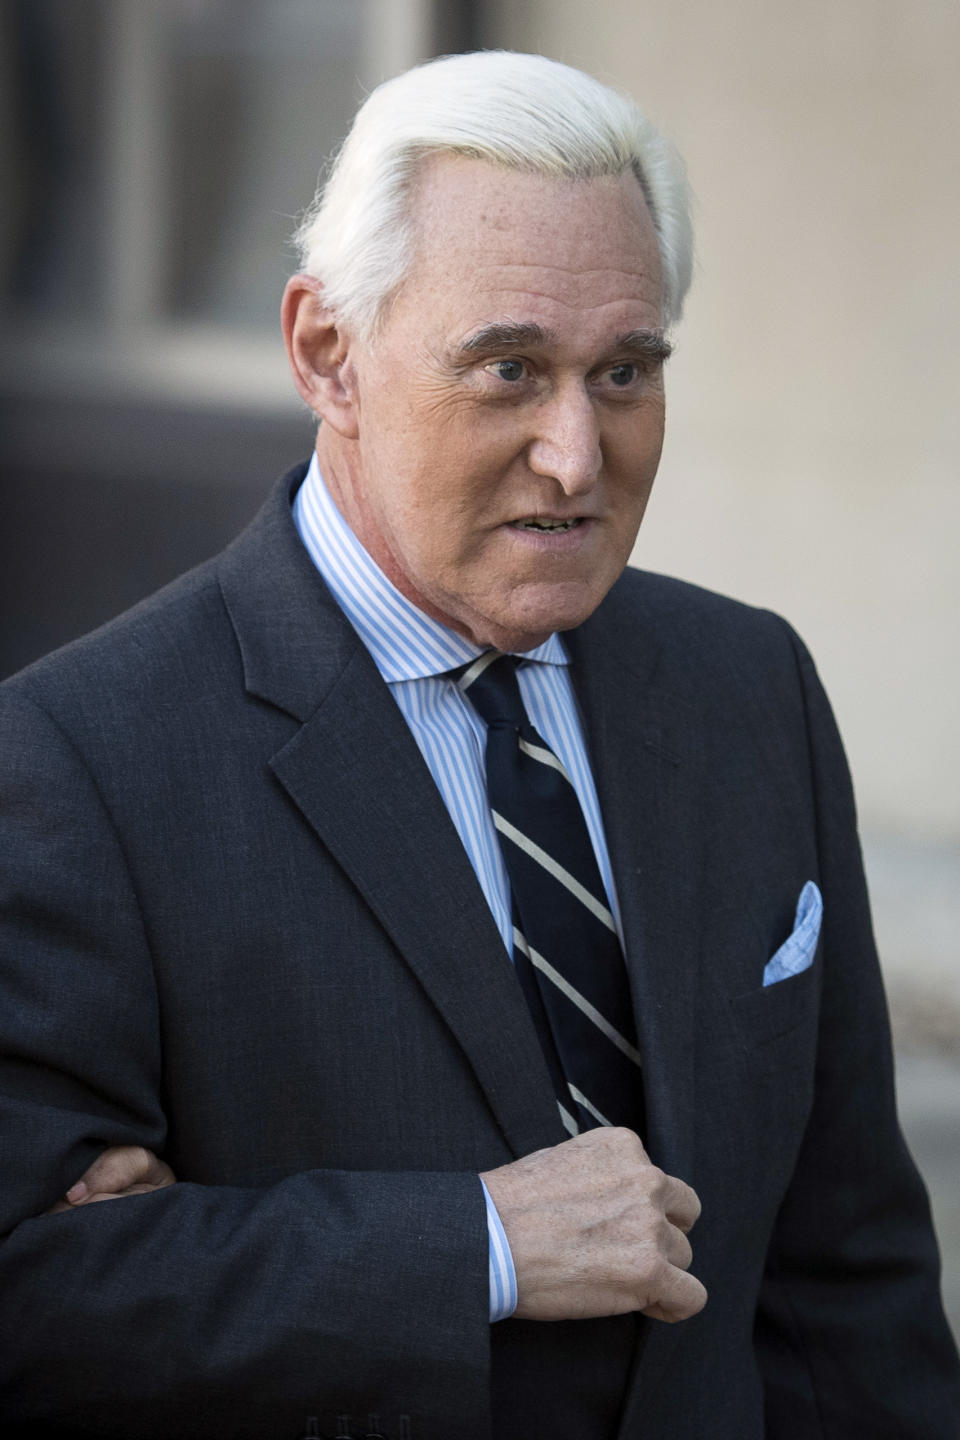 Roger Stone arrives at Federal Court for the second day of jury selection for his federal trial, in Washington, Wednesday, Nov. 6, 2019. (AP Photo/Cliff Owen)